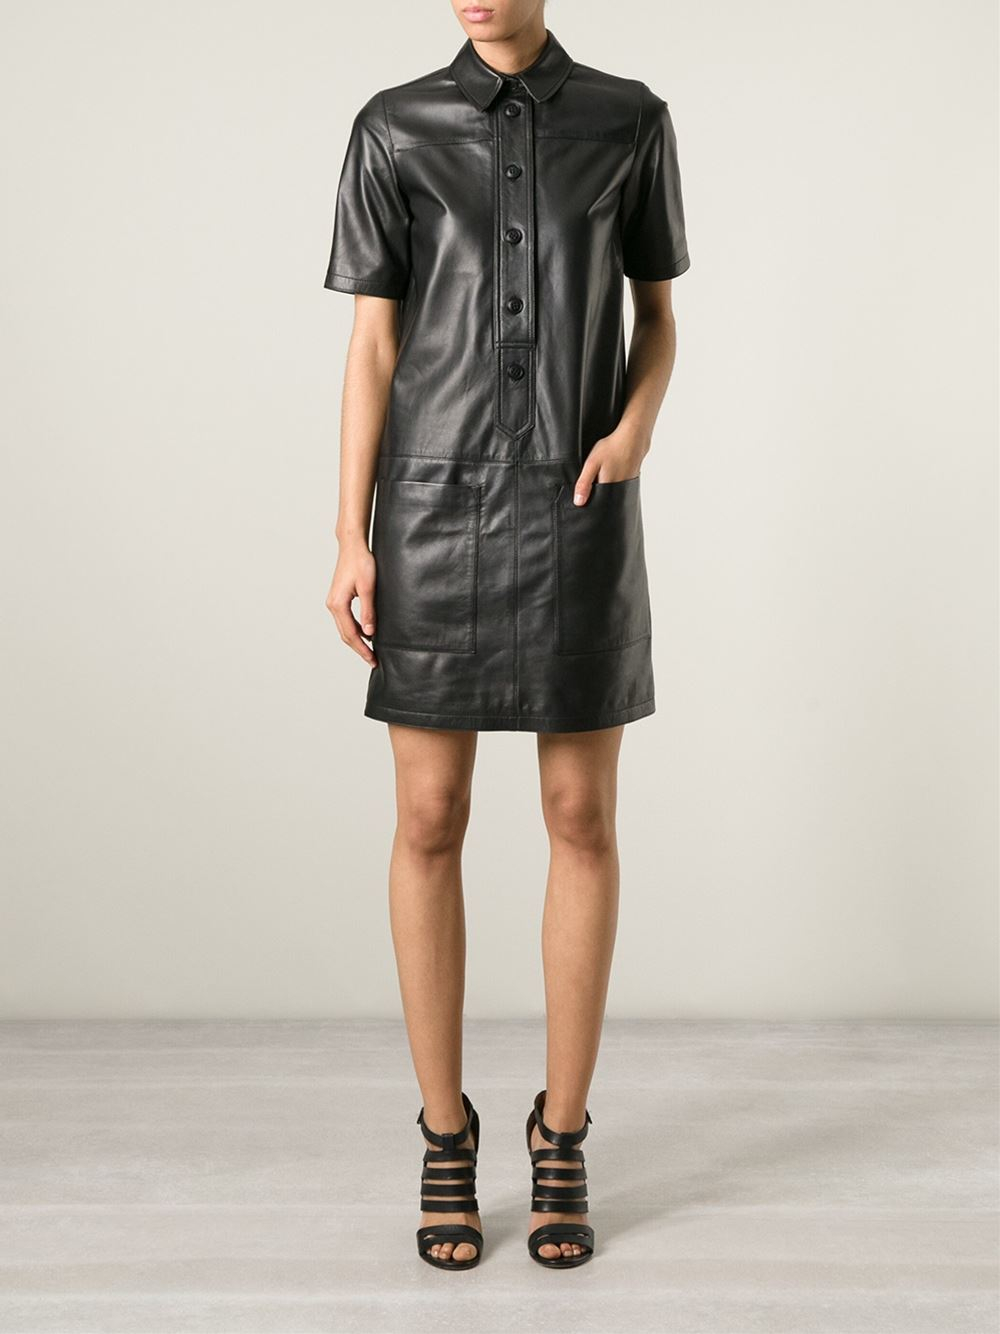  Burberry  brit Leather Shirt  Dress  in Black Lyst